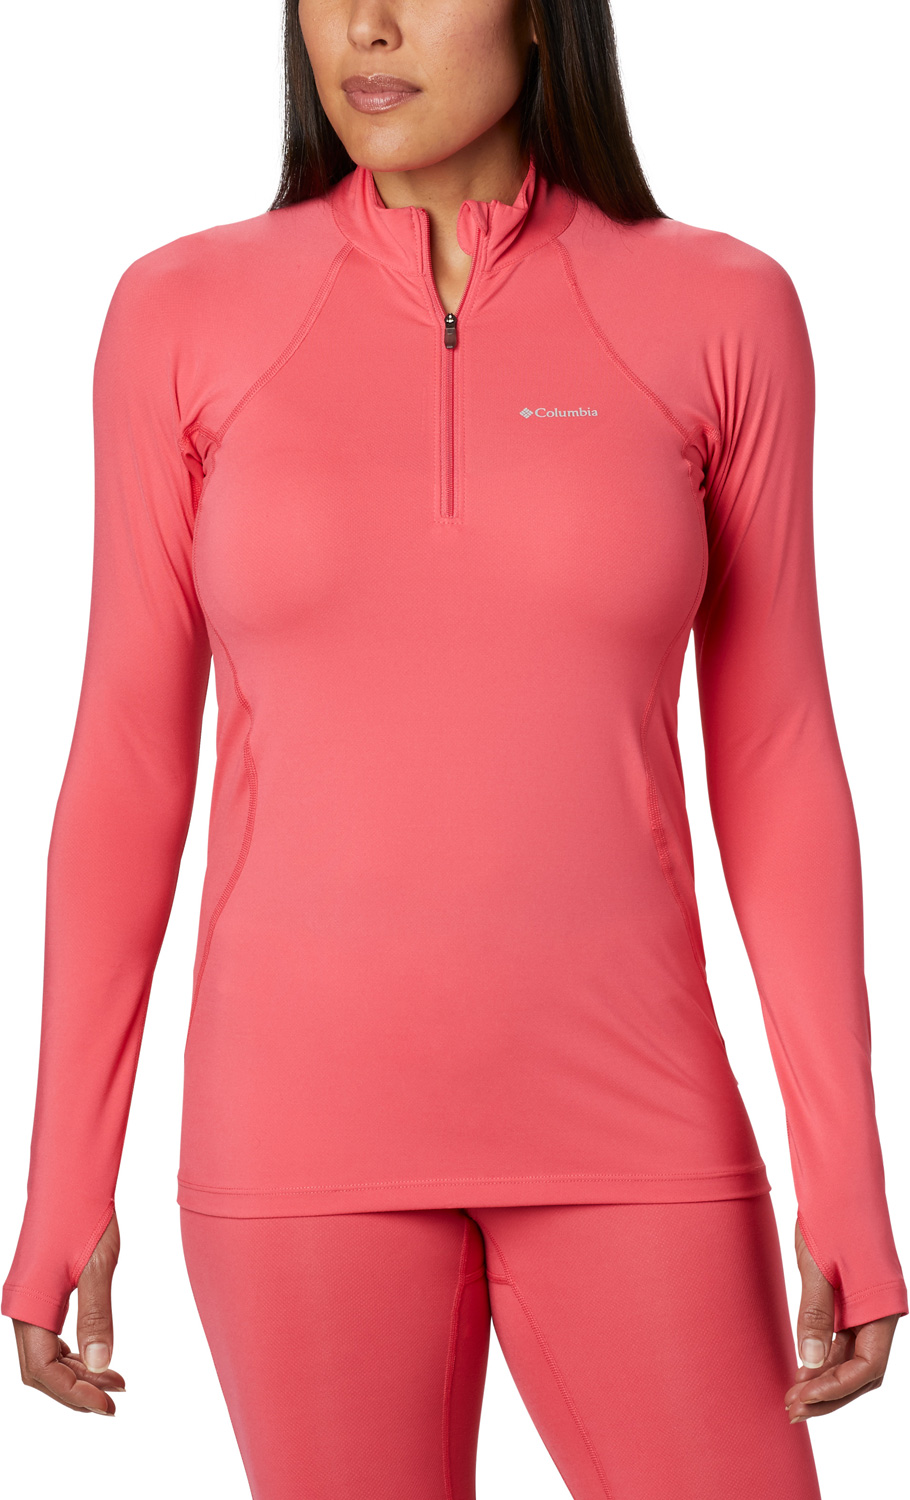 Columbia Midweight Stretch Long Sleeve Half Zip Baselayer Top Donna 